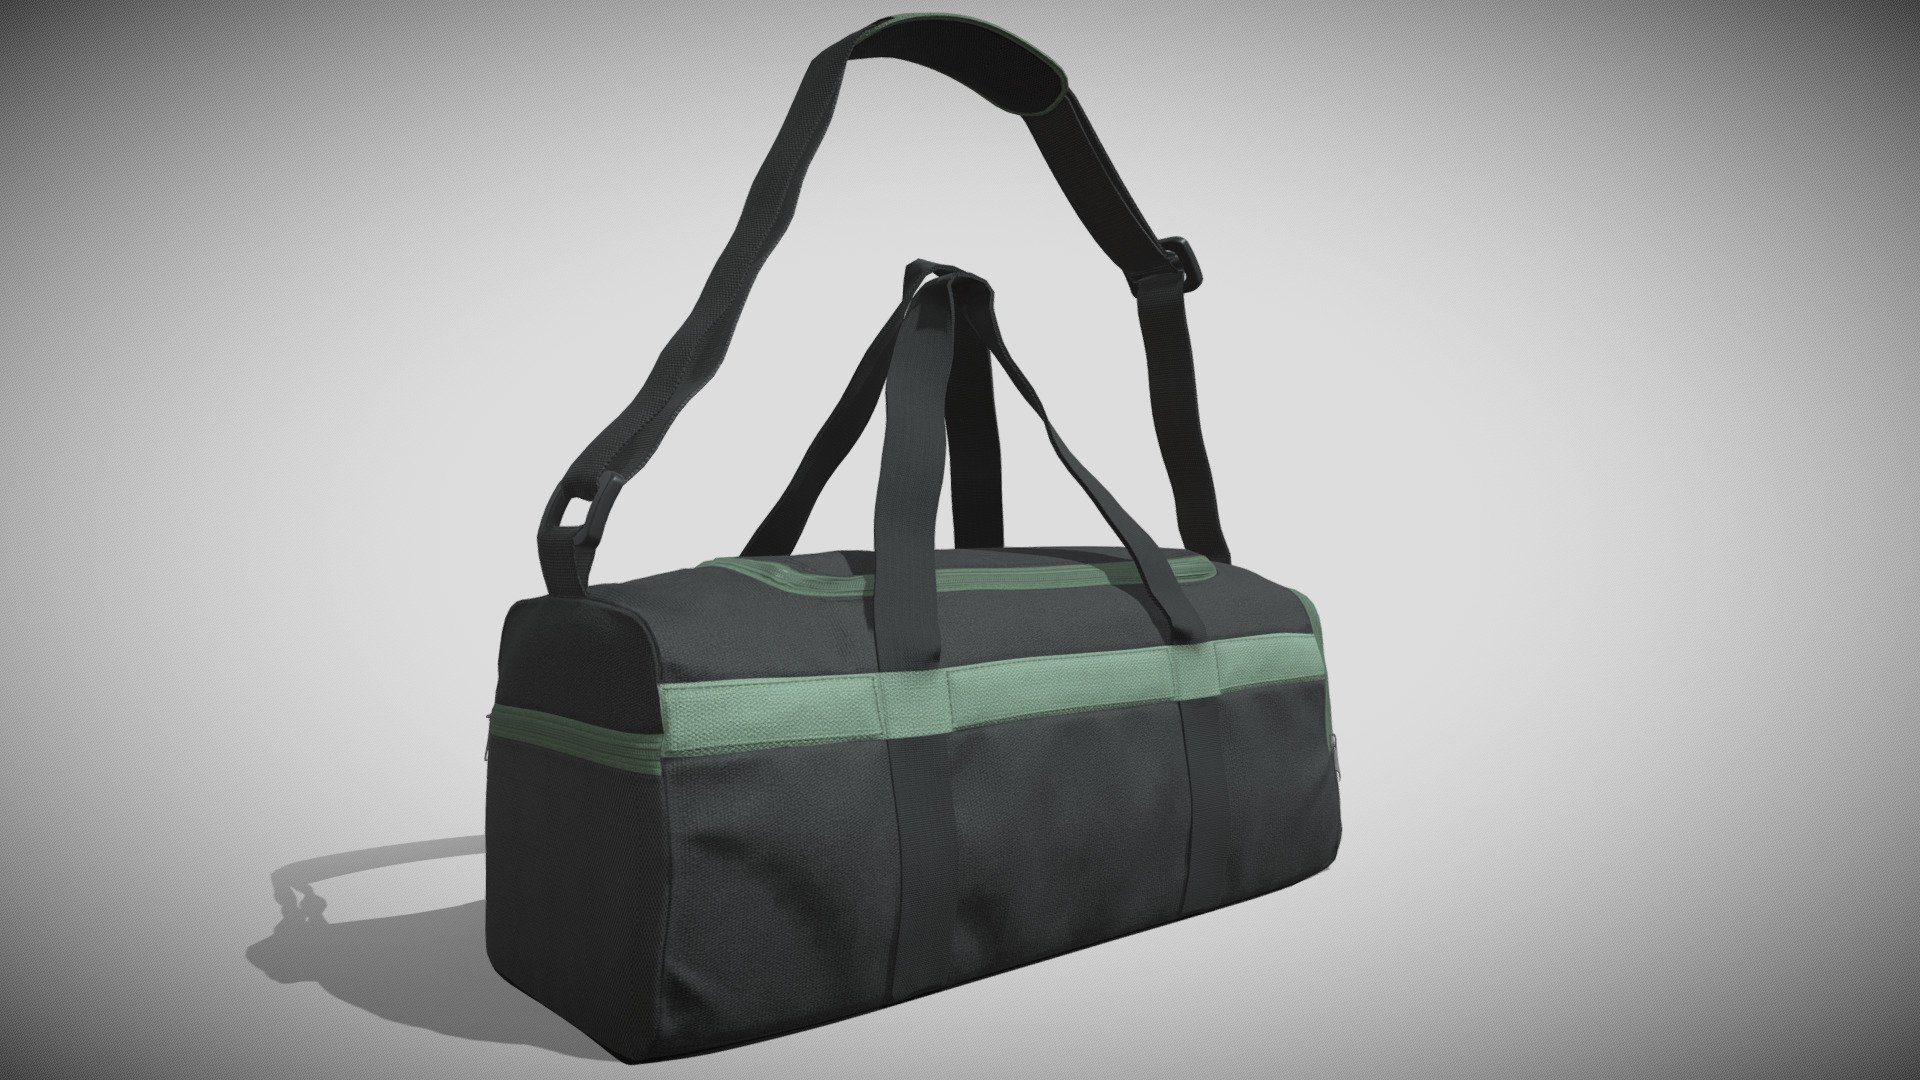 This Low Poly Duffle Bag Comes with 4K textures. Its a realistic bag and can be used for games and animation. Formats: FBX, 3ds max, Blender 2.8 Animated : No Rigged : No VR / AR / Low-poly : Yes PBR : Yes Geometry: Subdivision Polygons: 27,621 Vertices: 27,607 Textures: Yes Materials: Yes UV Mapping: Yes

NOTE: Please Contact for cutom Logo and Color. Once you buy the model you can ask for your own customisation free of cost 3d model